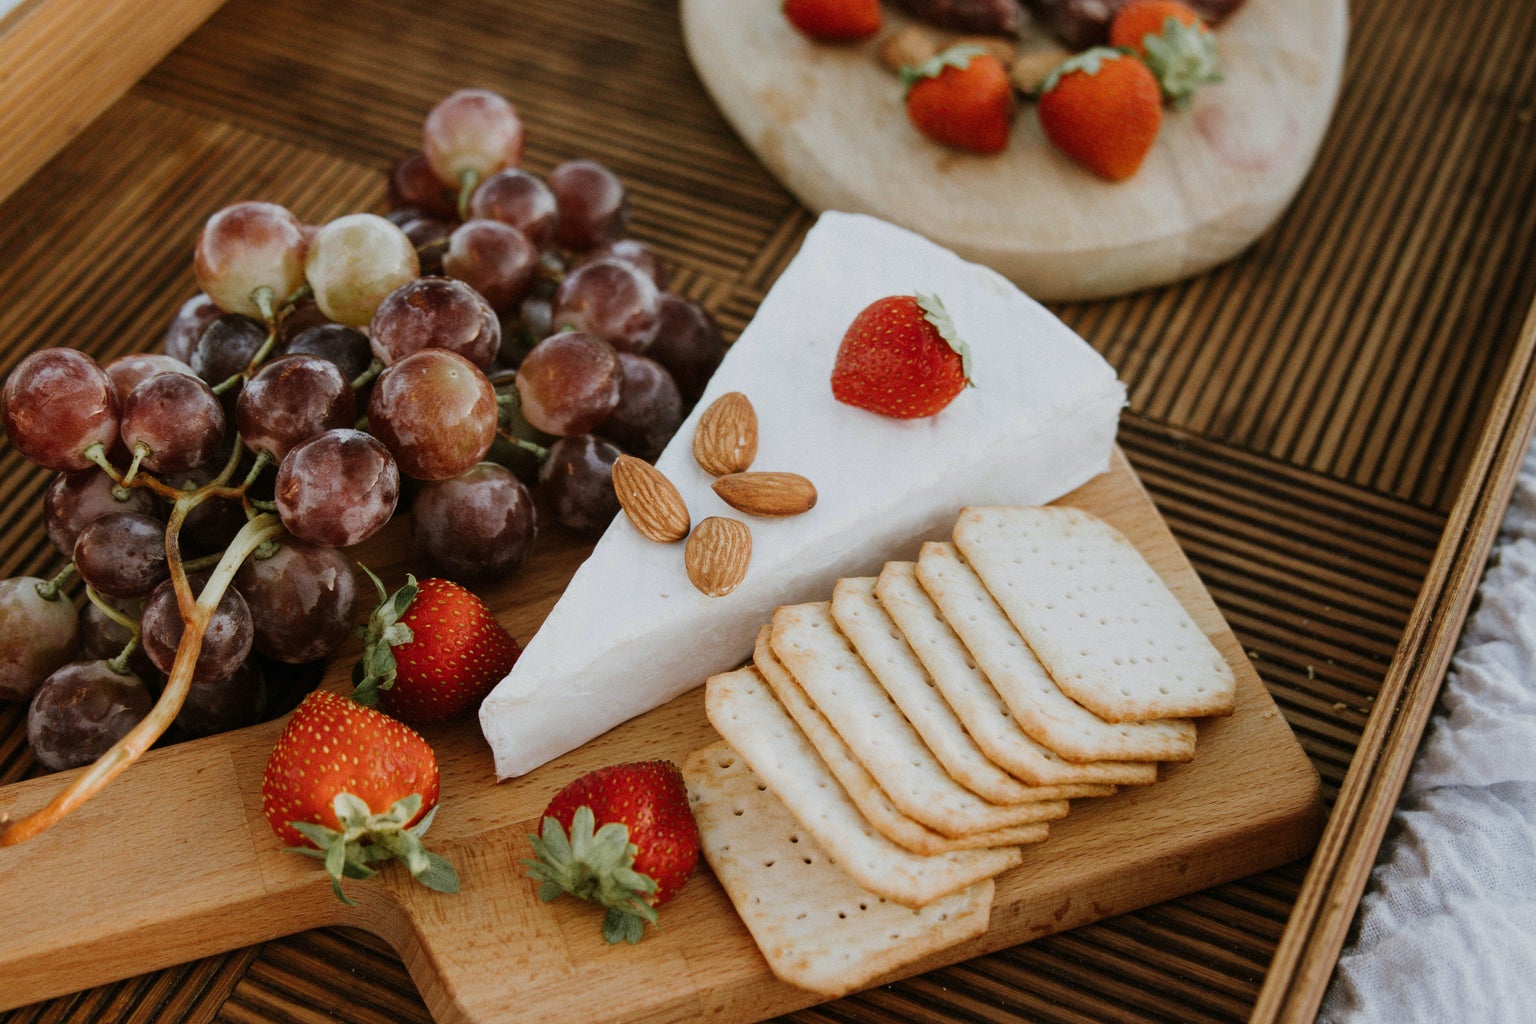 cheese, crackers and fruit